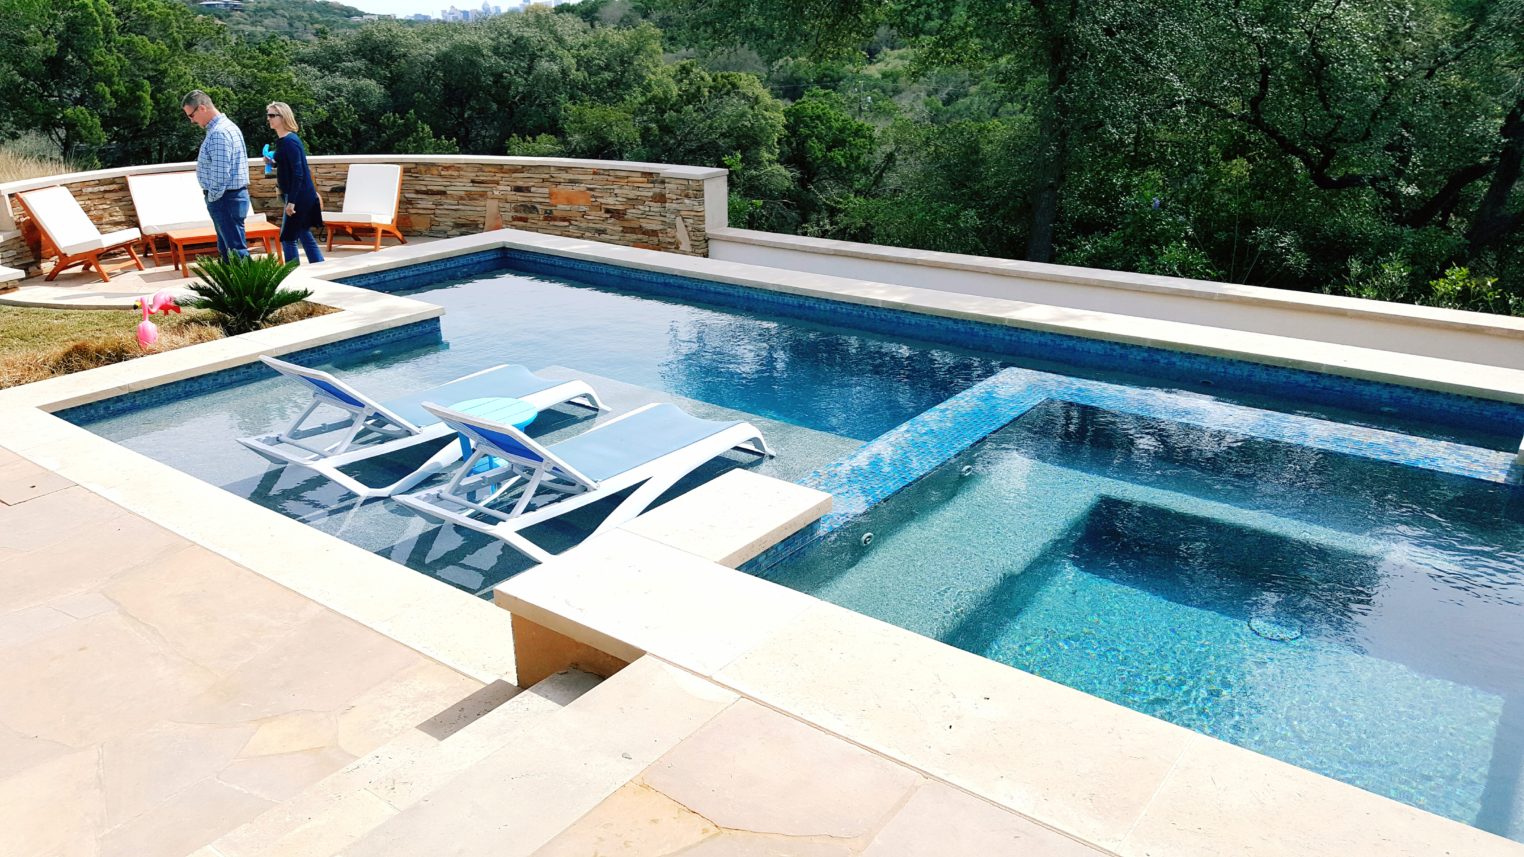 Fabulous outdoor pools on the 2019 Austin Modern Home Tour. See details on The Pillow Goddess blog!